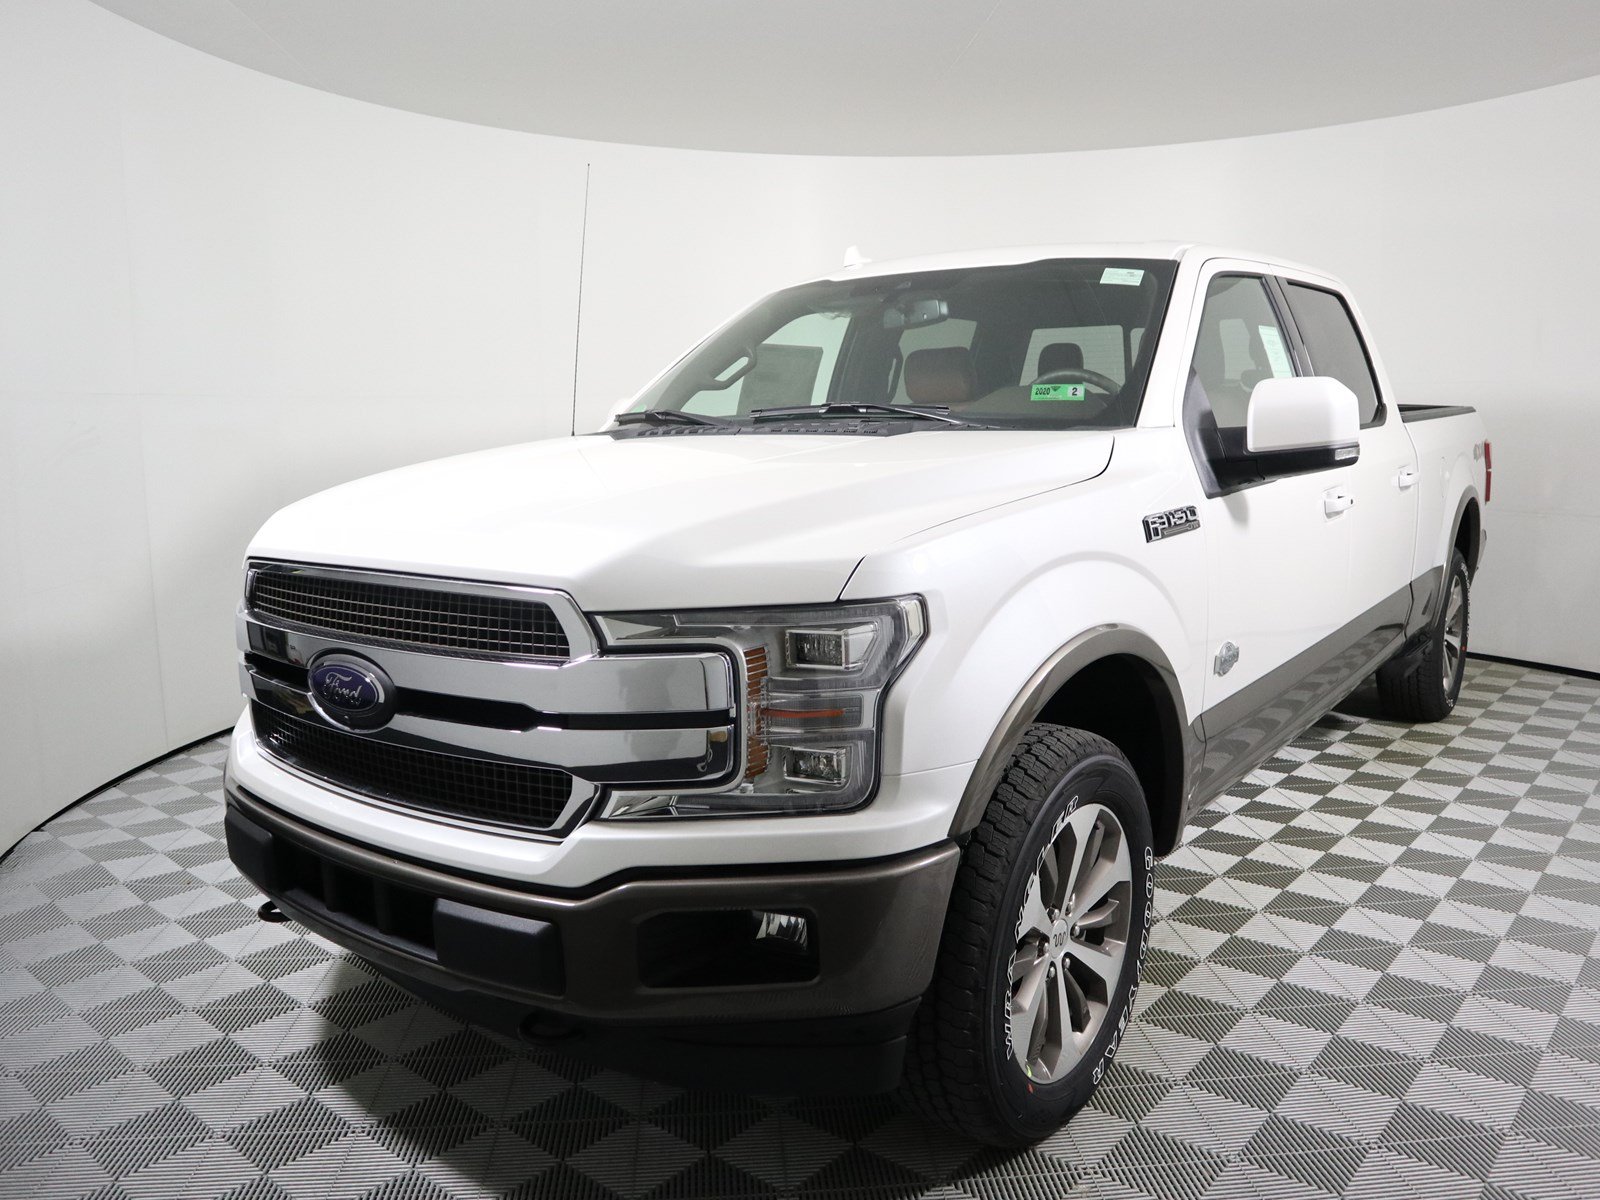 New 2019 Ford F-150 King Ranch Crew Cab Pickup in Parkersburg #F18989